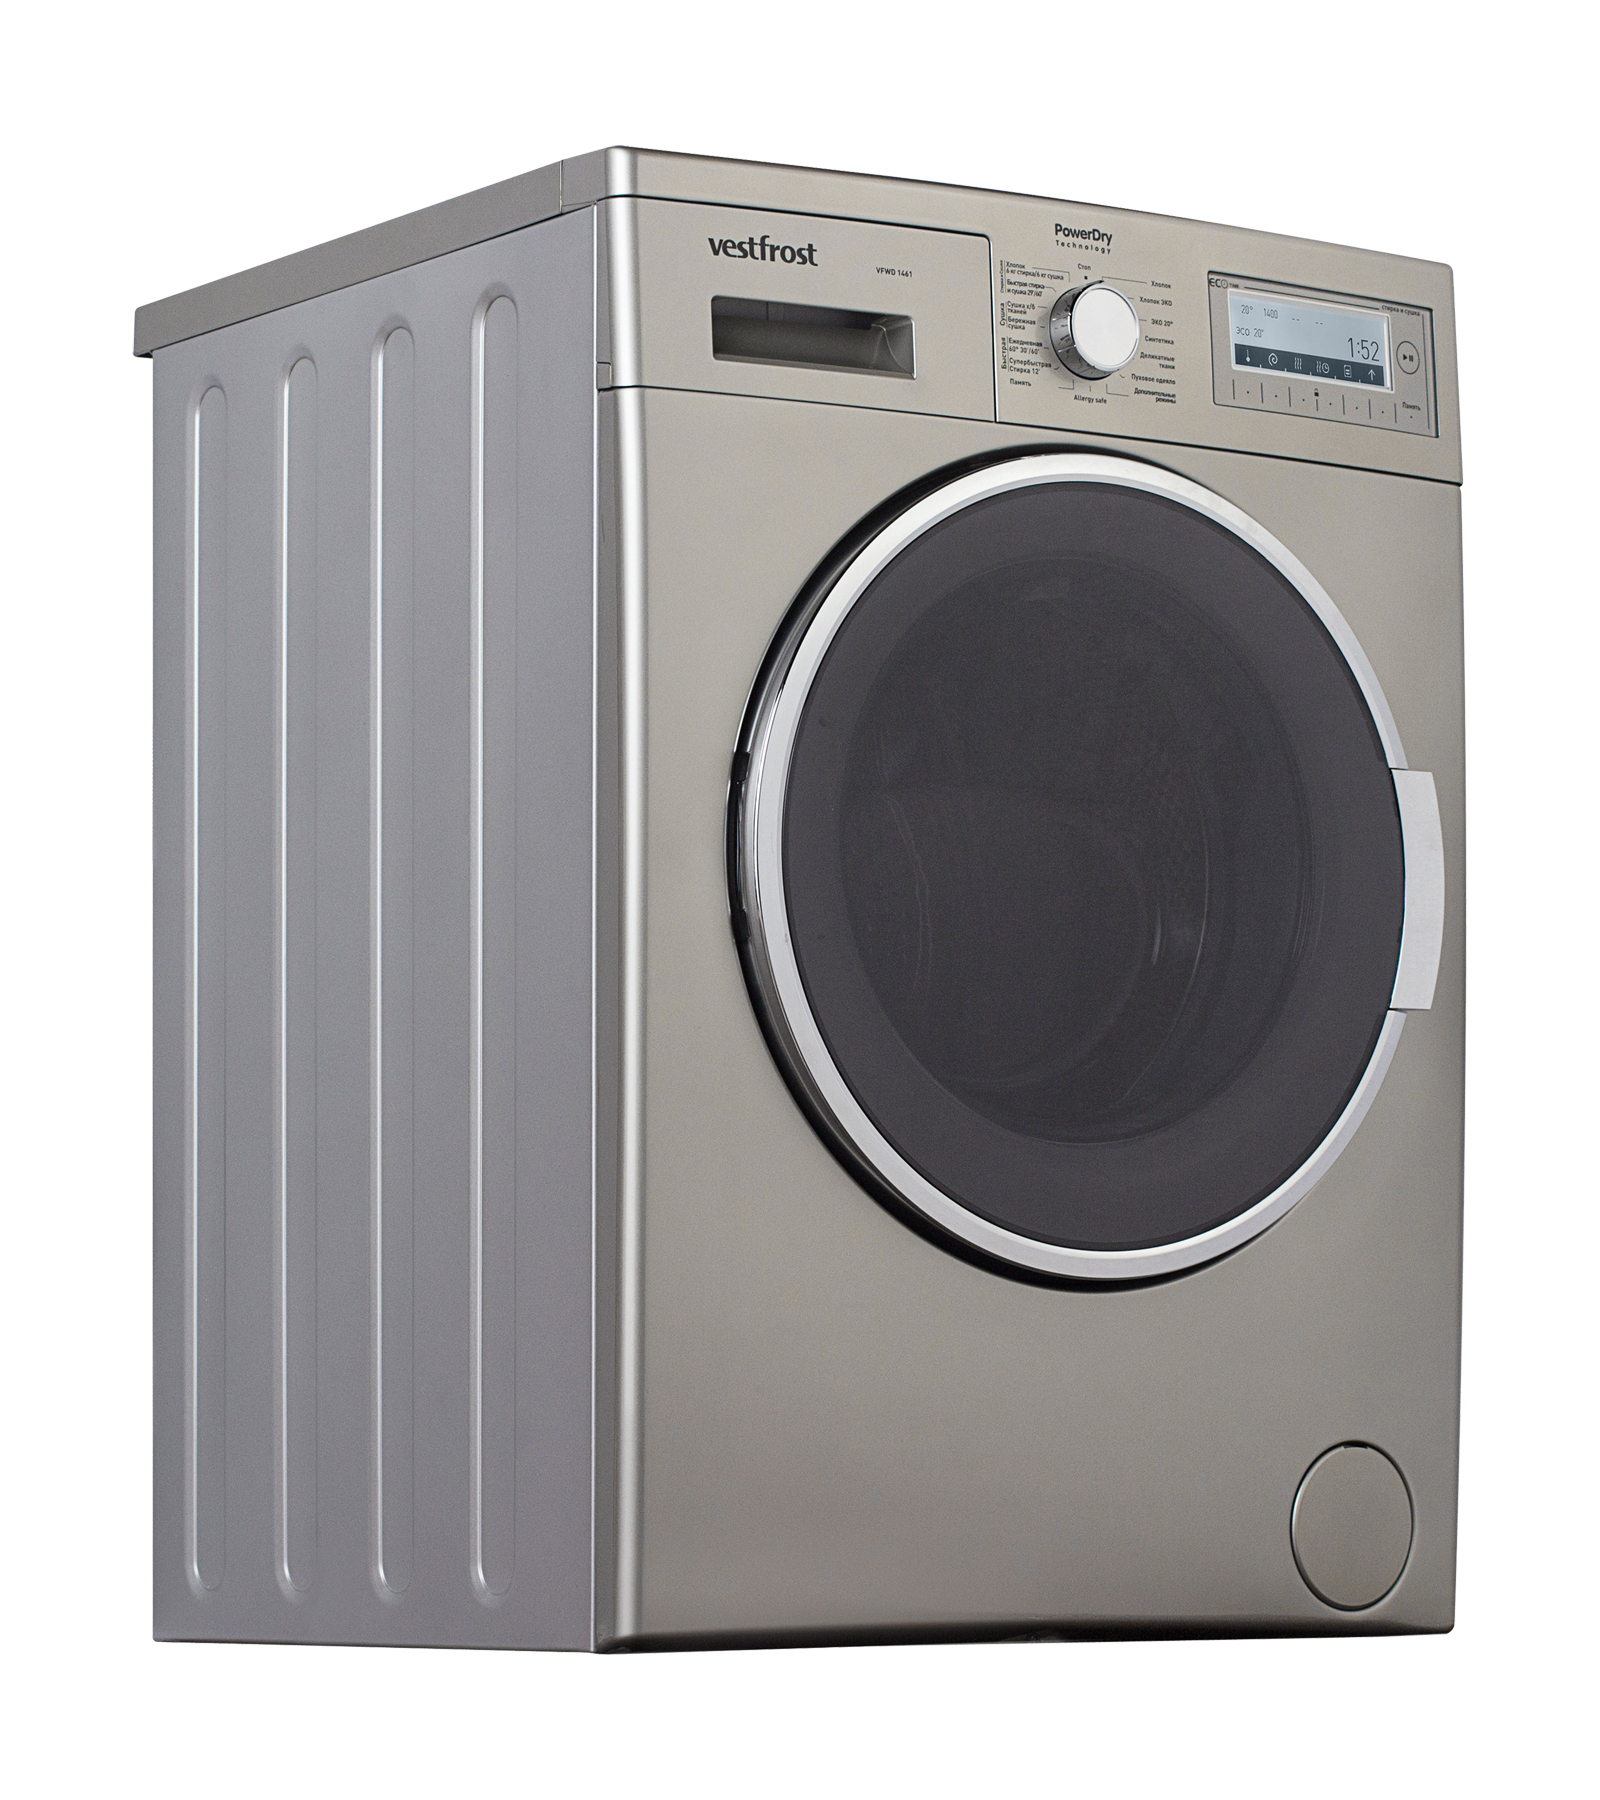 Vestfrost washer-dryers